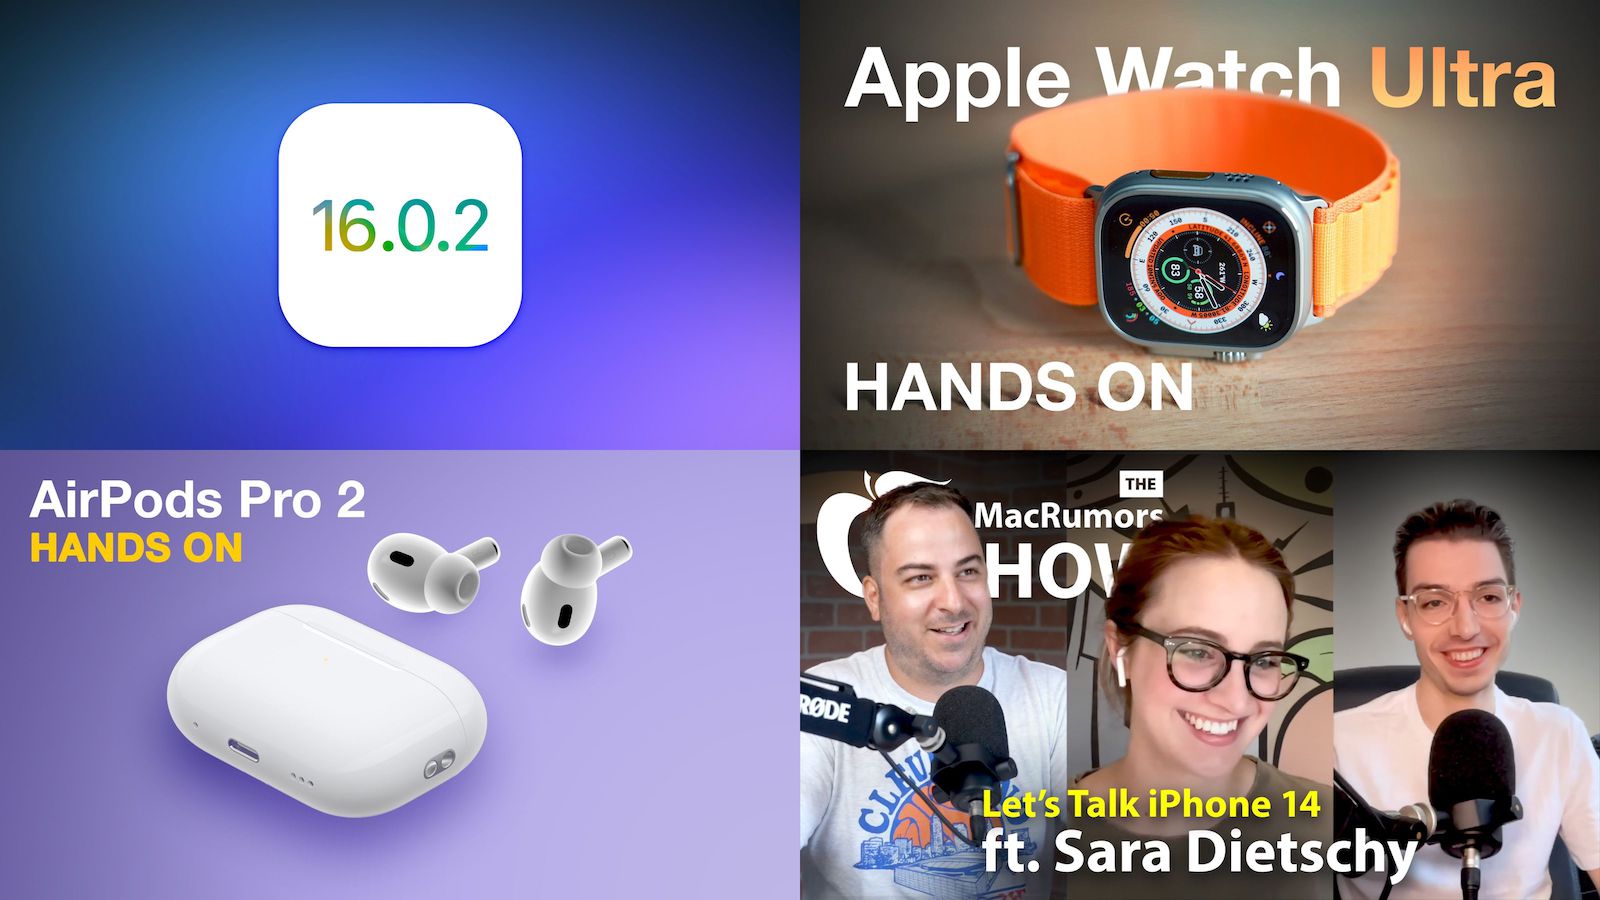 Top Stories: iOS 16.0.2 Bug Fixes, Apple Watch Ultra and AirPods Pro 2 Launch, a..